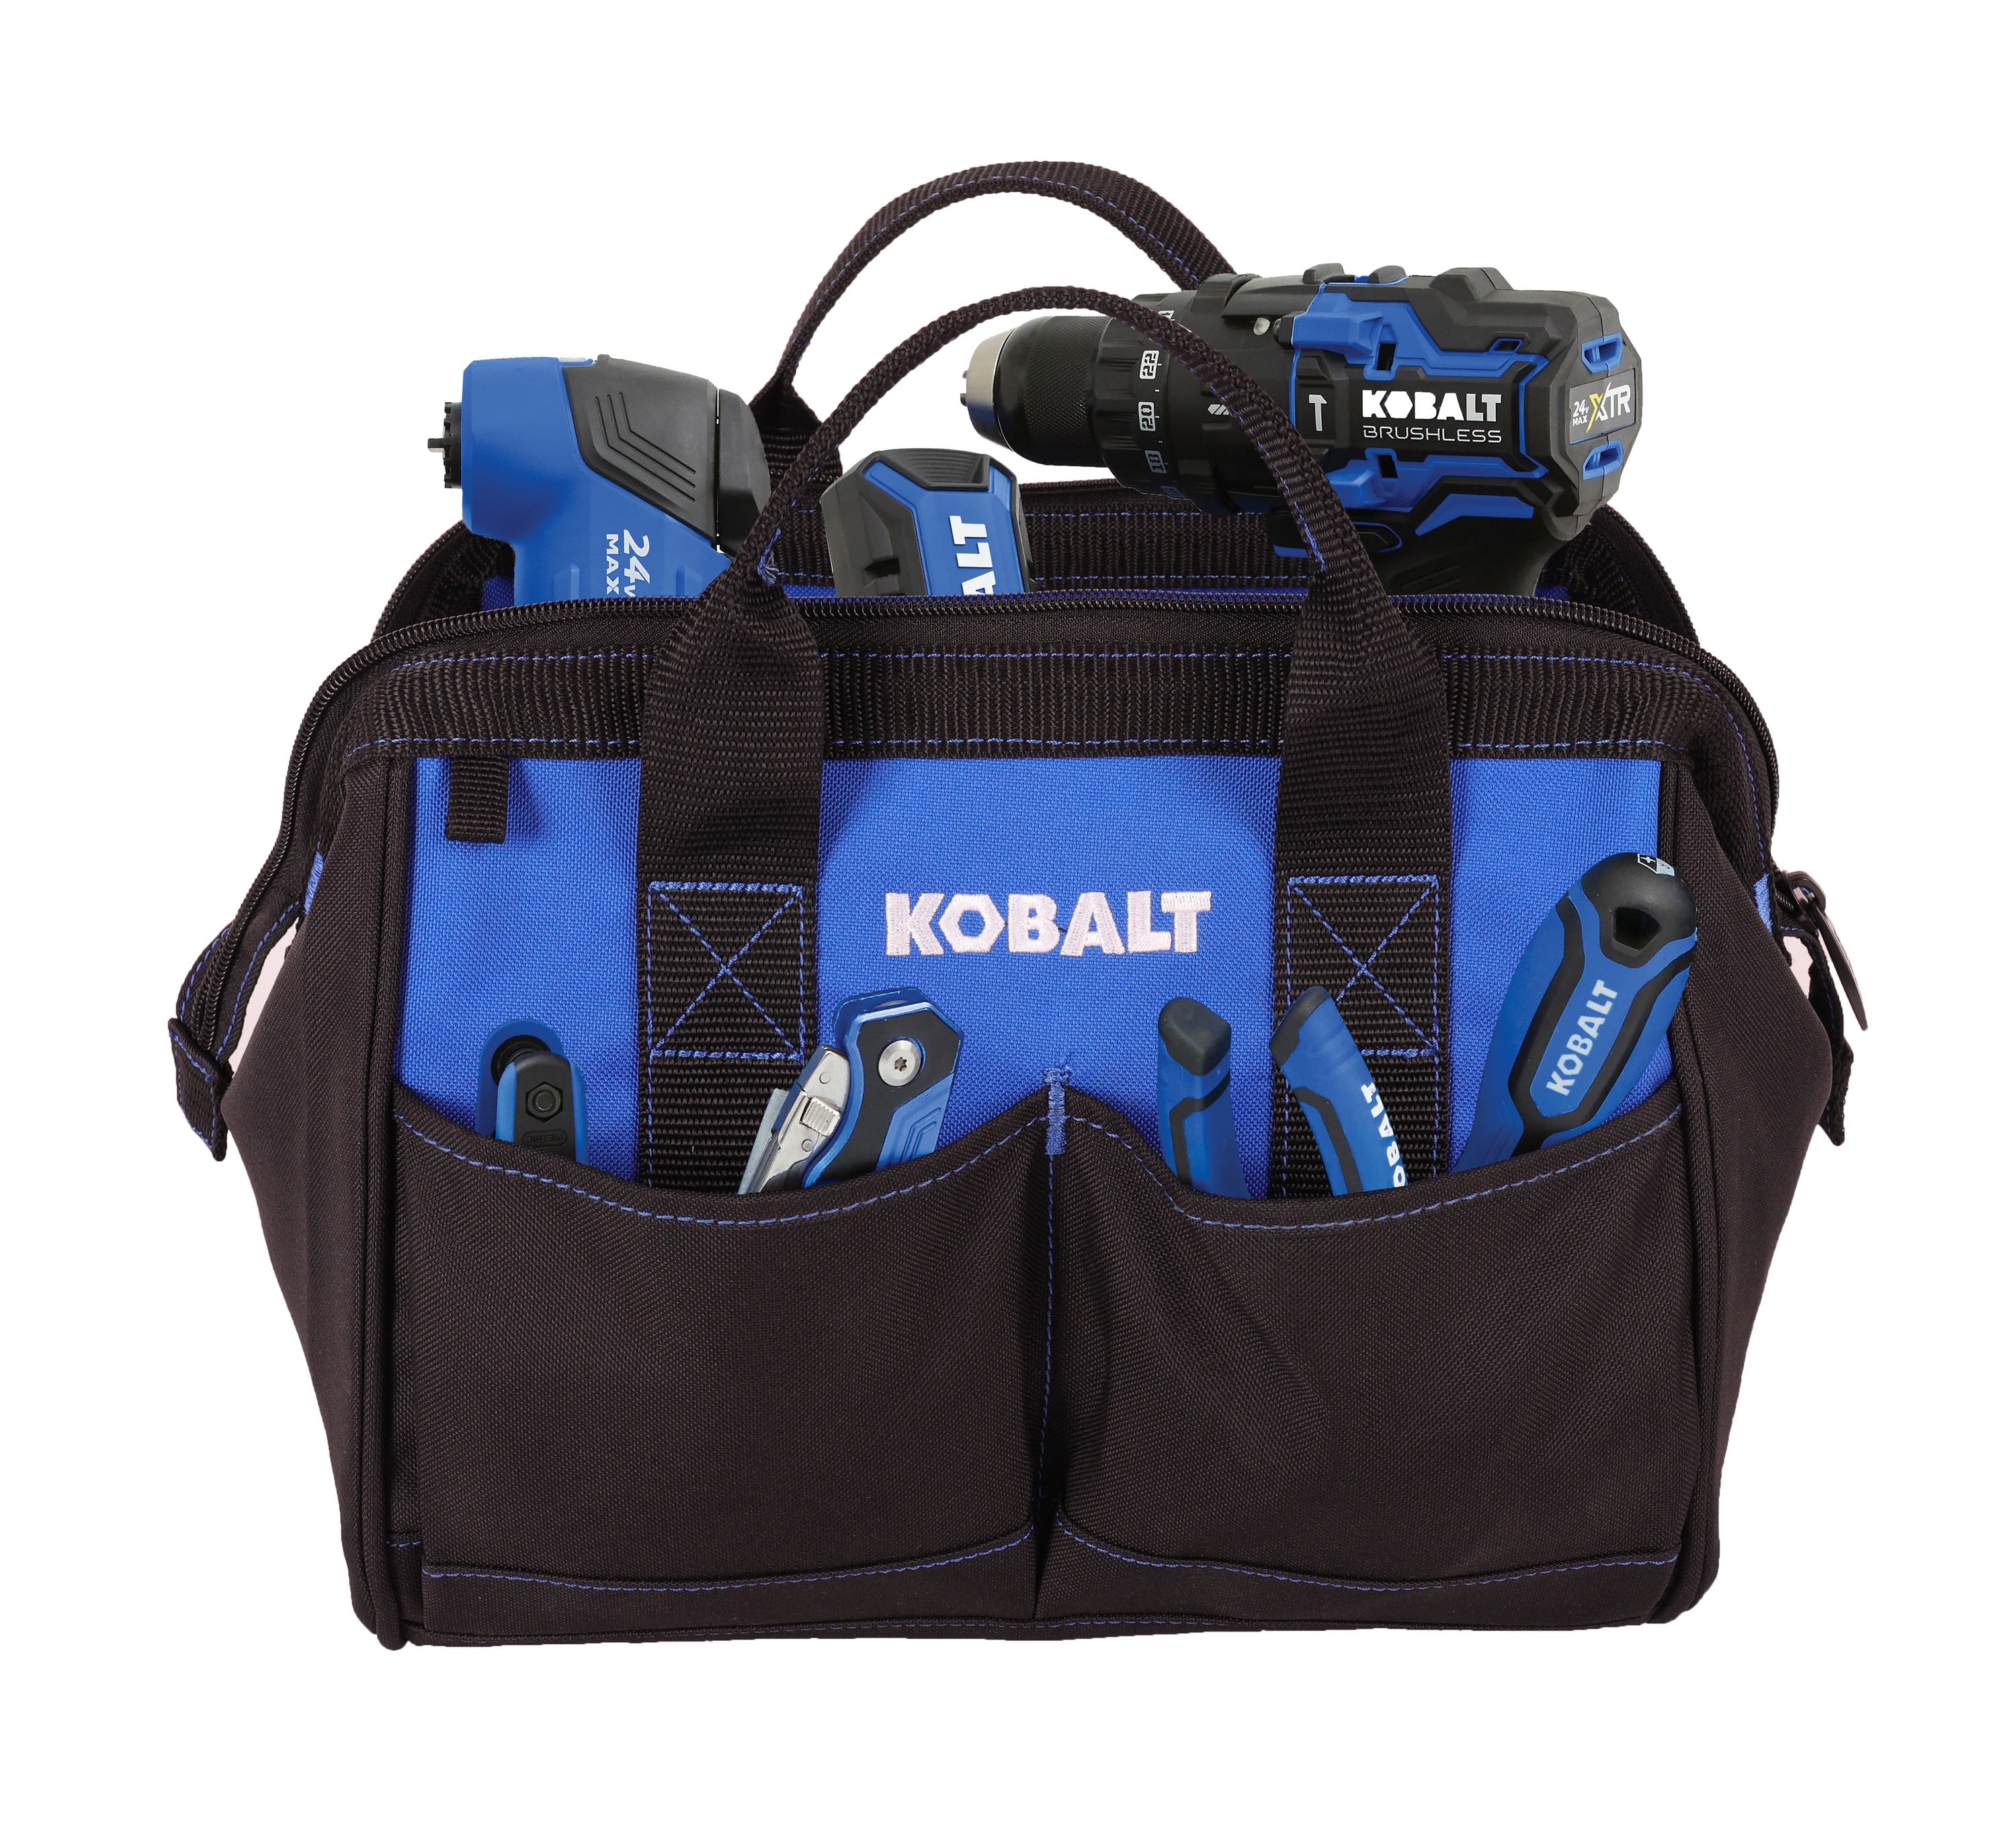 New Kobalt Wheeled Rolling Tool Bag with Handle 12" wide x 17" long x 15" High 